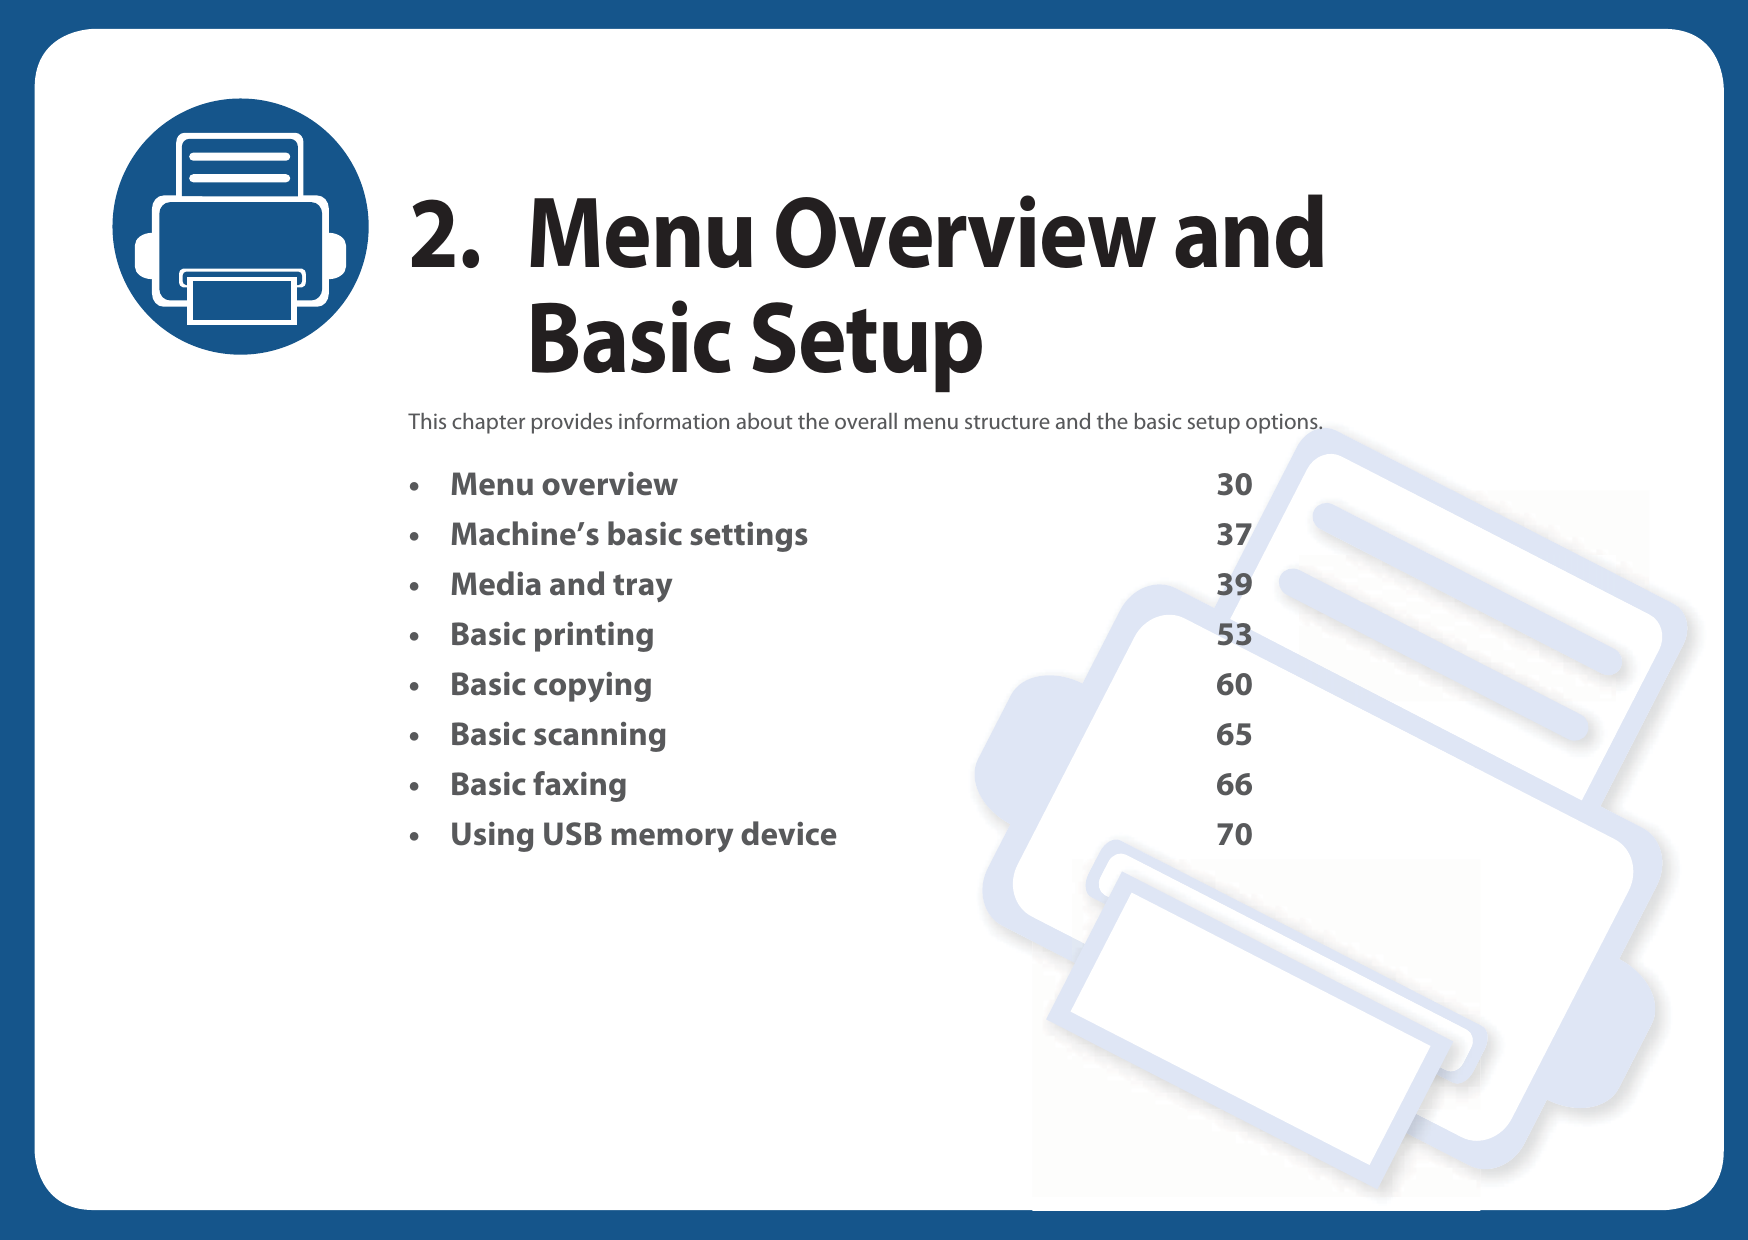 2. Menu Overview and Basic SetupThis chapter provides information about the overall menu structure and the basic setup options.• Menu overview 30• Machine’s basic settings 37• Media and tray 39• Basic printing 53• Basic copying 60• Basic scanning 65• Basic faxing 66• Using USB memory device 70